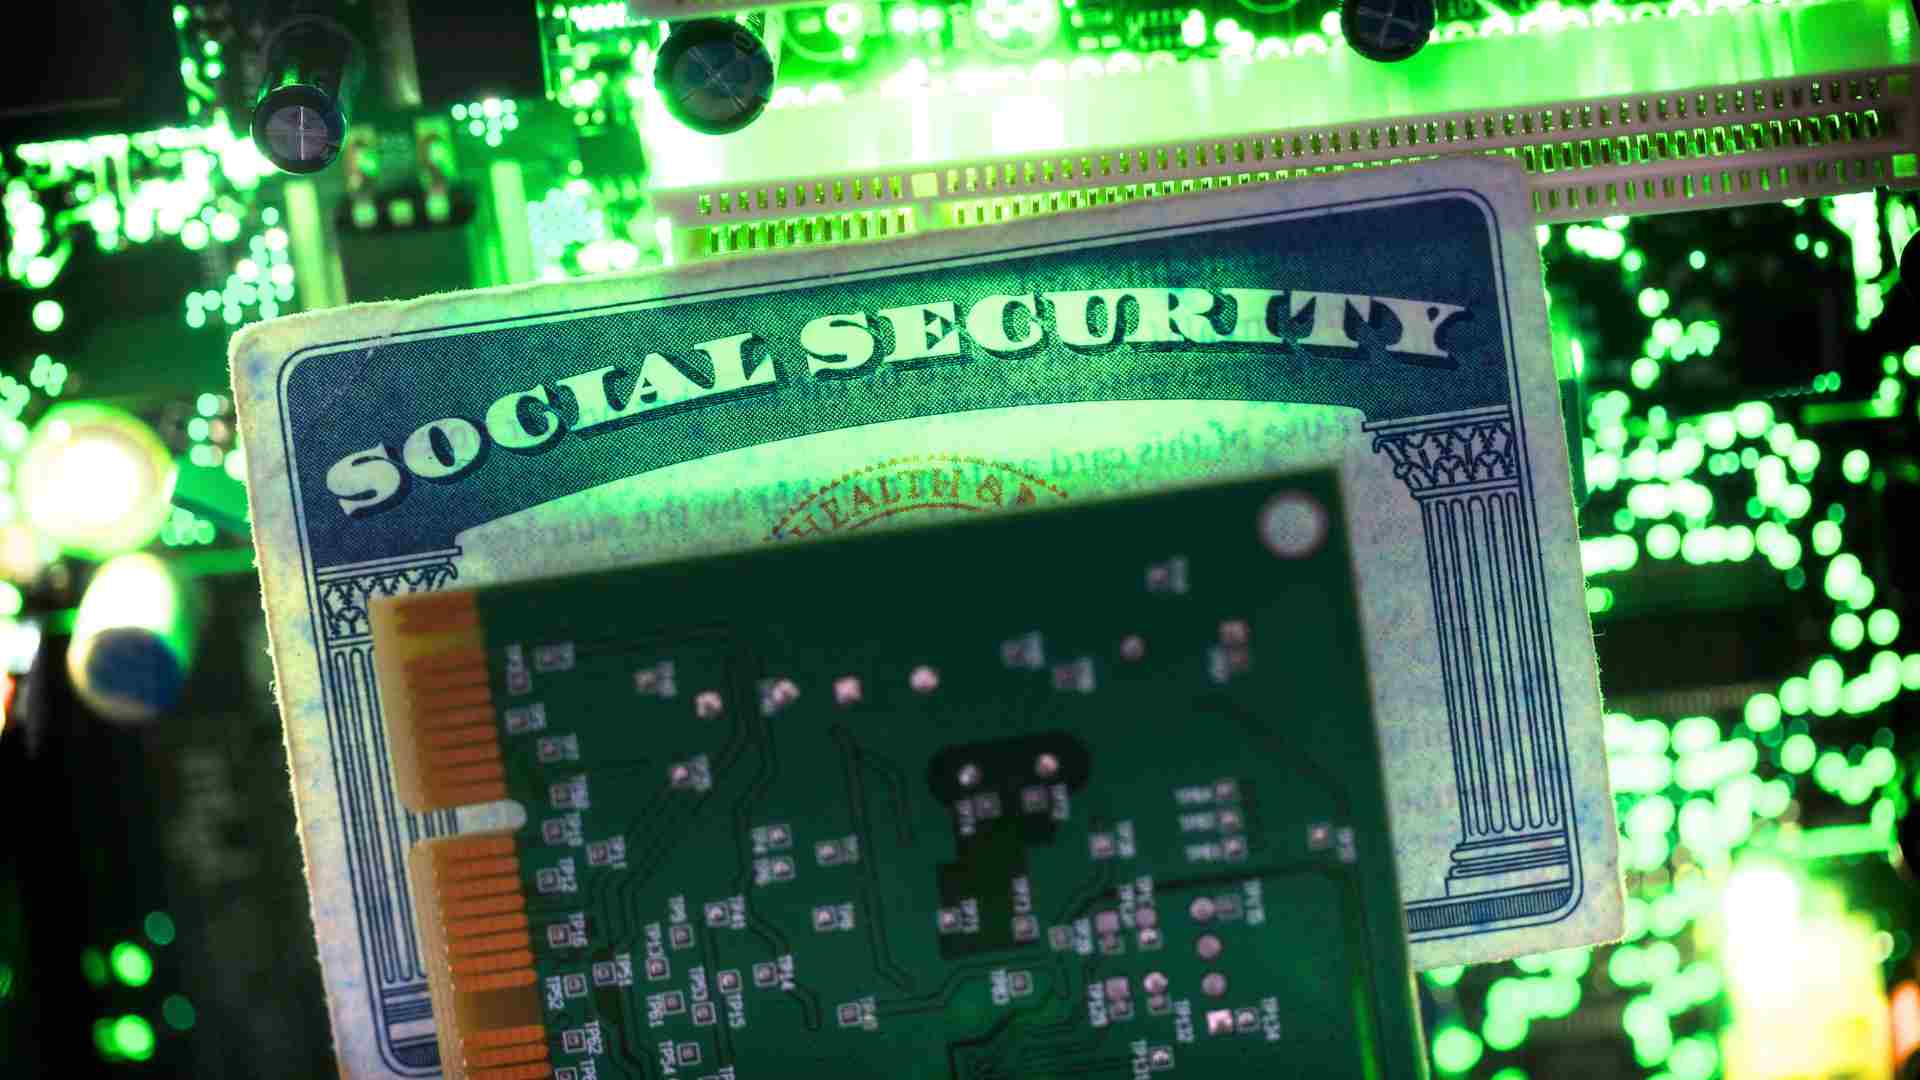 Social Security informs Americans of the best way to protect themselves from scams and identity thefts